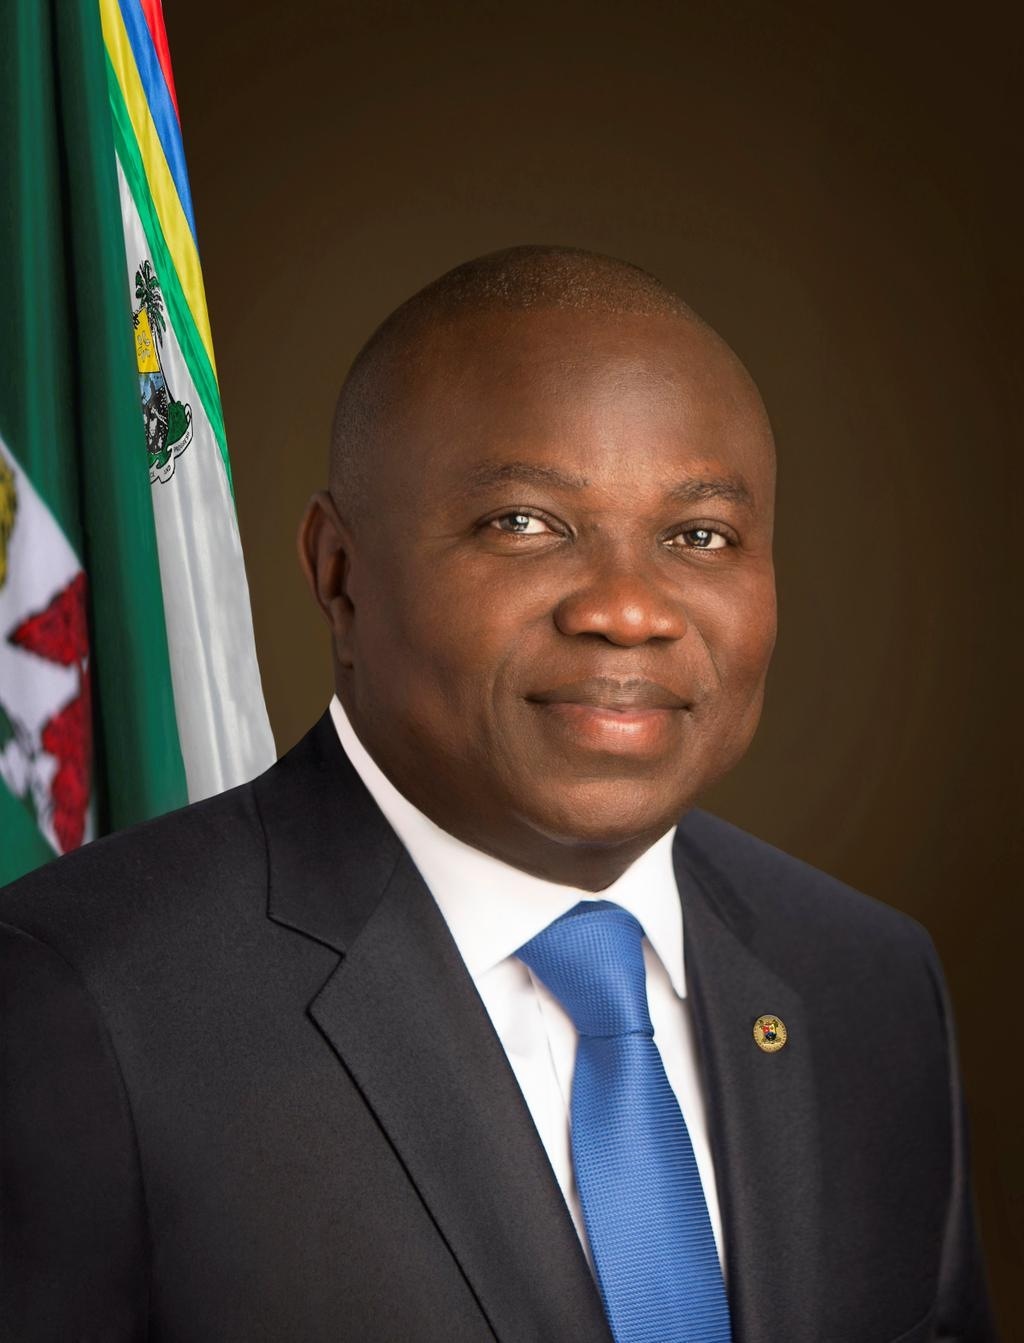 Lagos State GovernorElect, Akinwunmi Ambode Releases Official Portrait